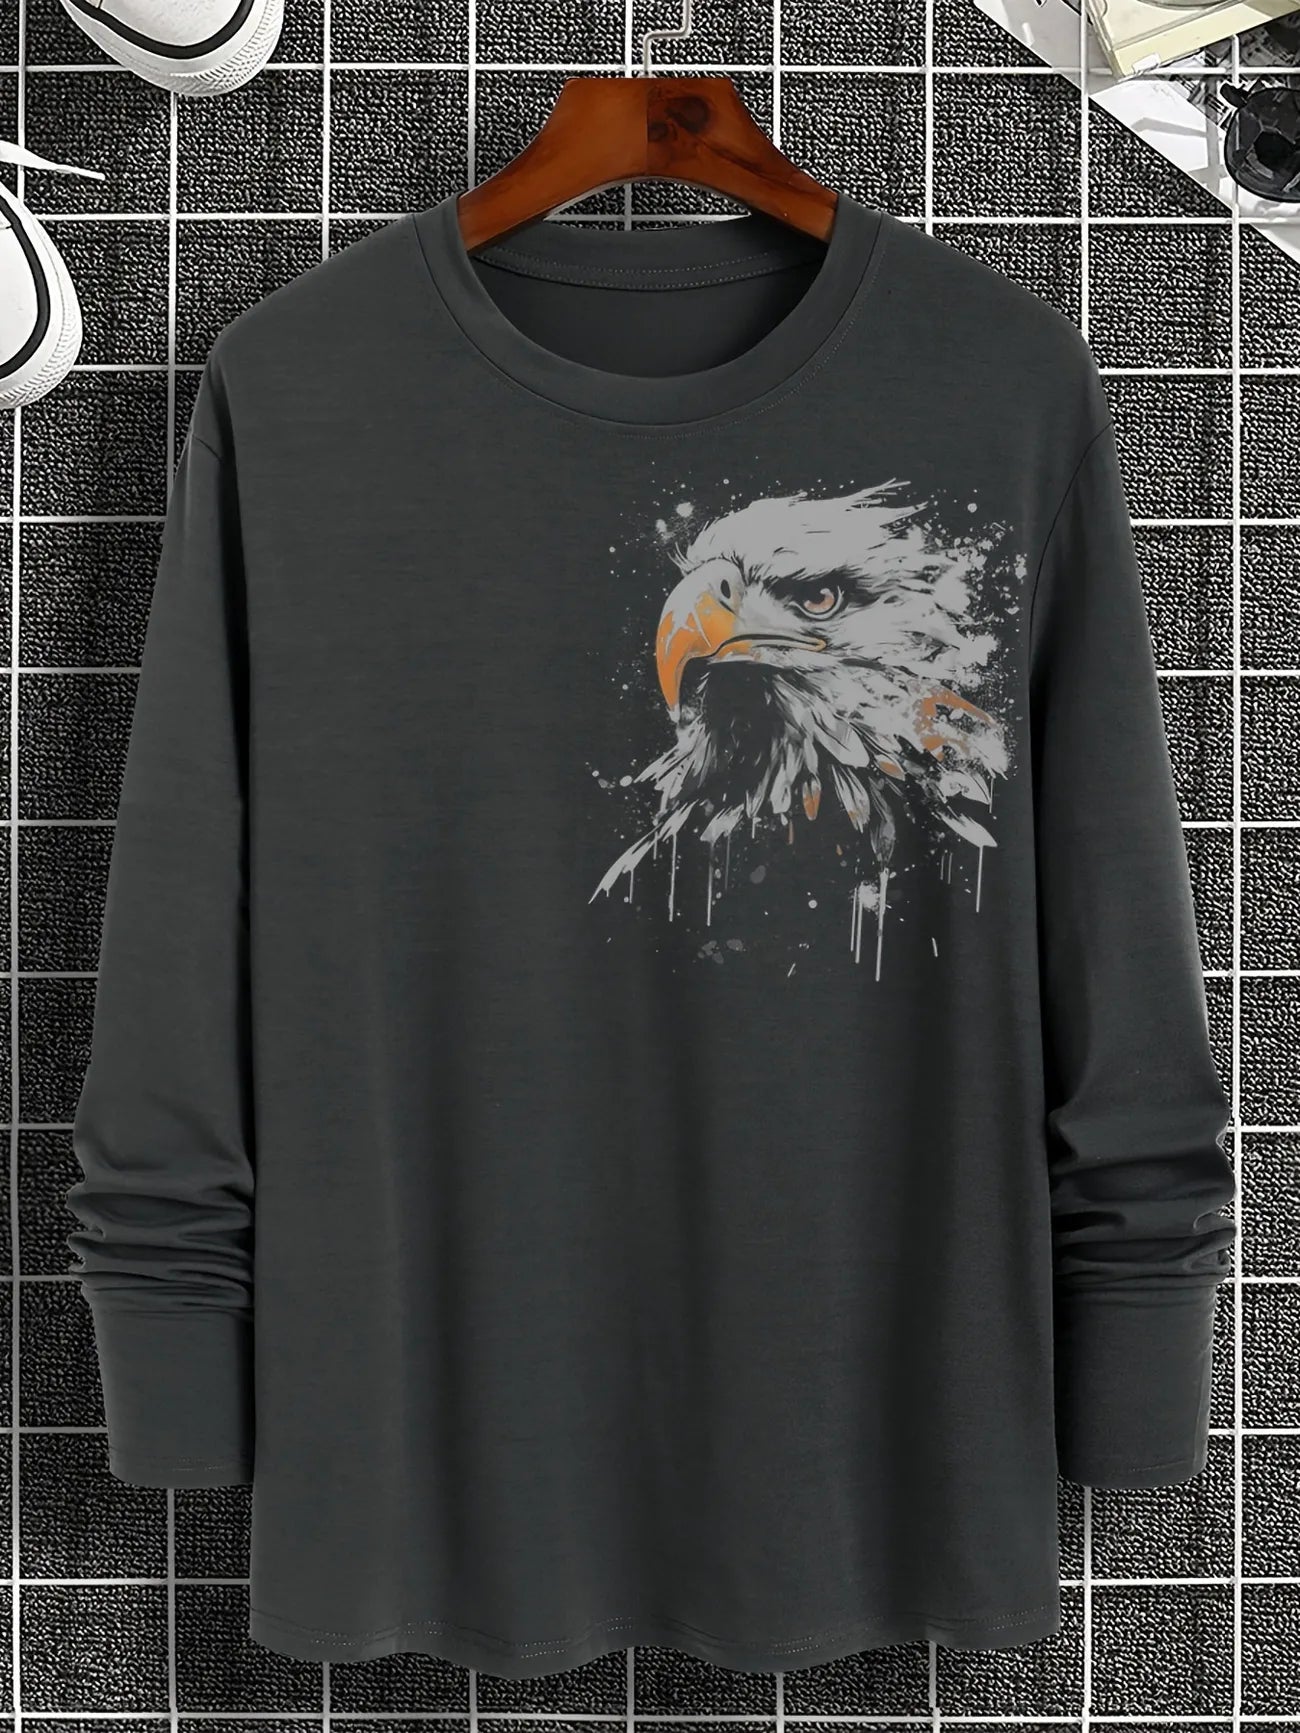 Mens Cotton Sticker Printed Long Sleeve T-Shirt by Tee Tall LSTTMPS5 - Charcoal